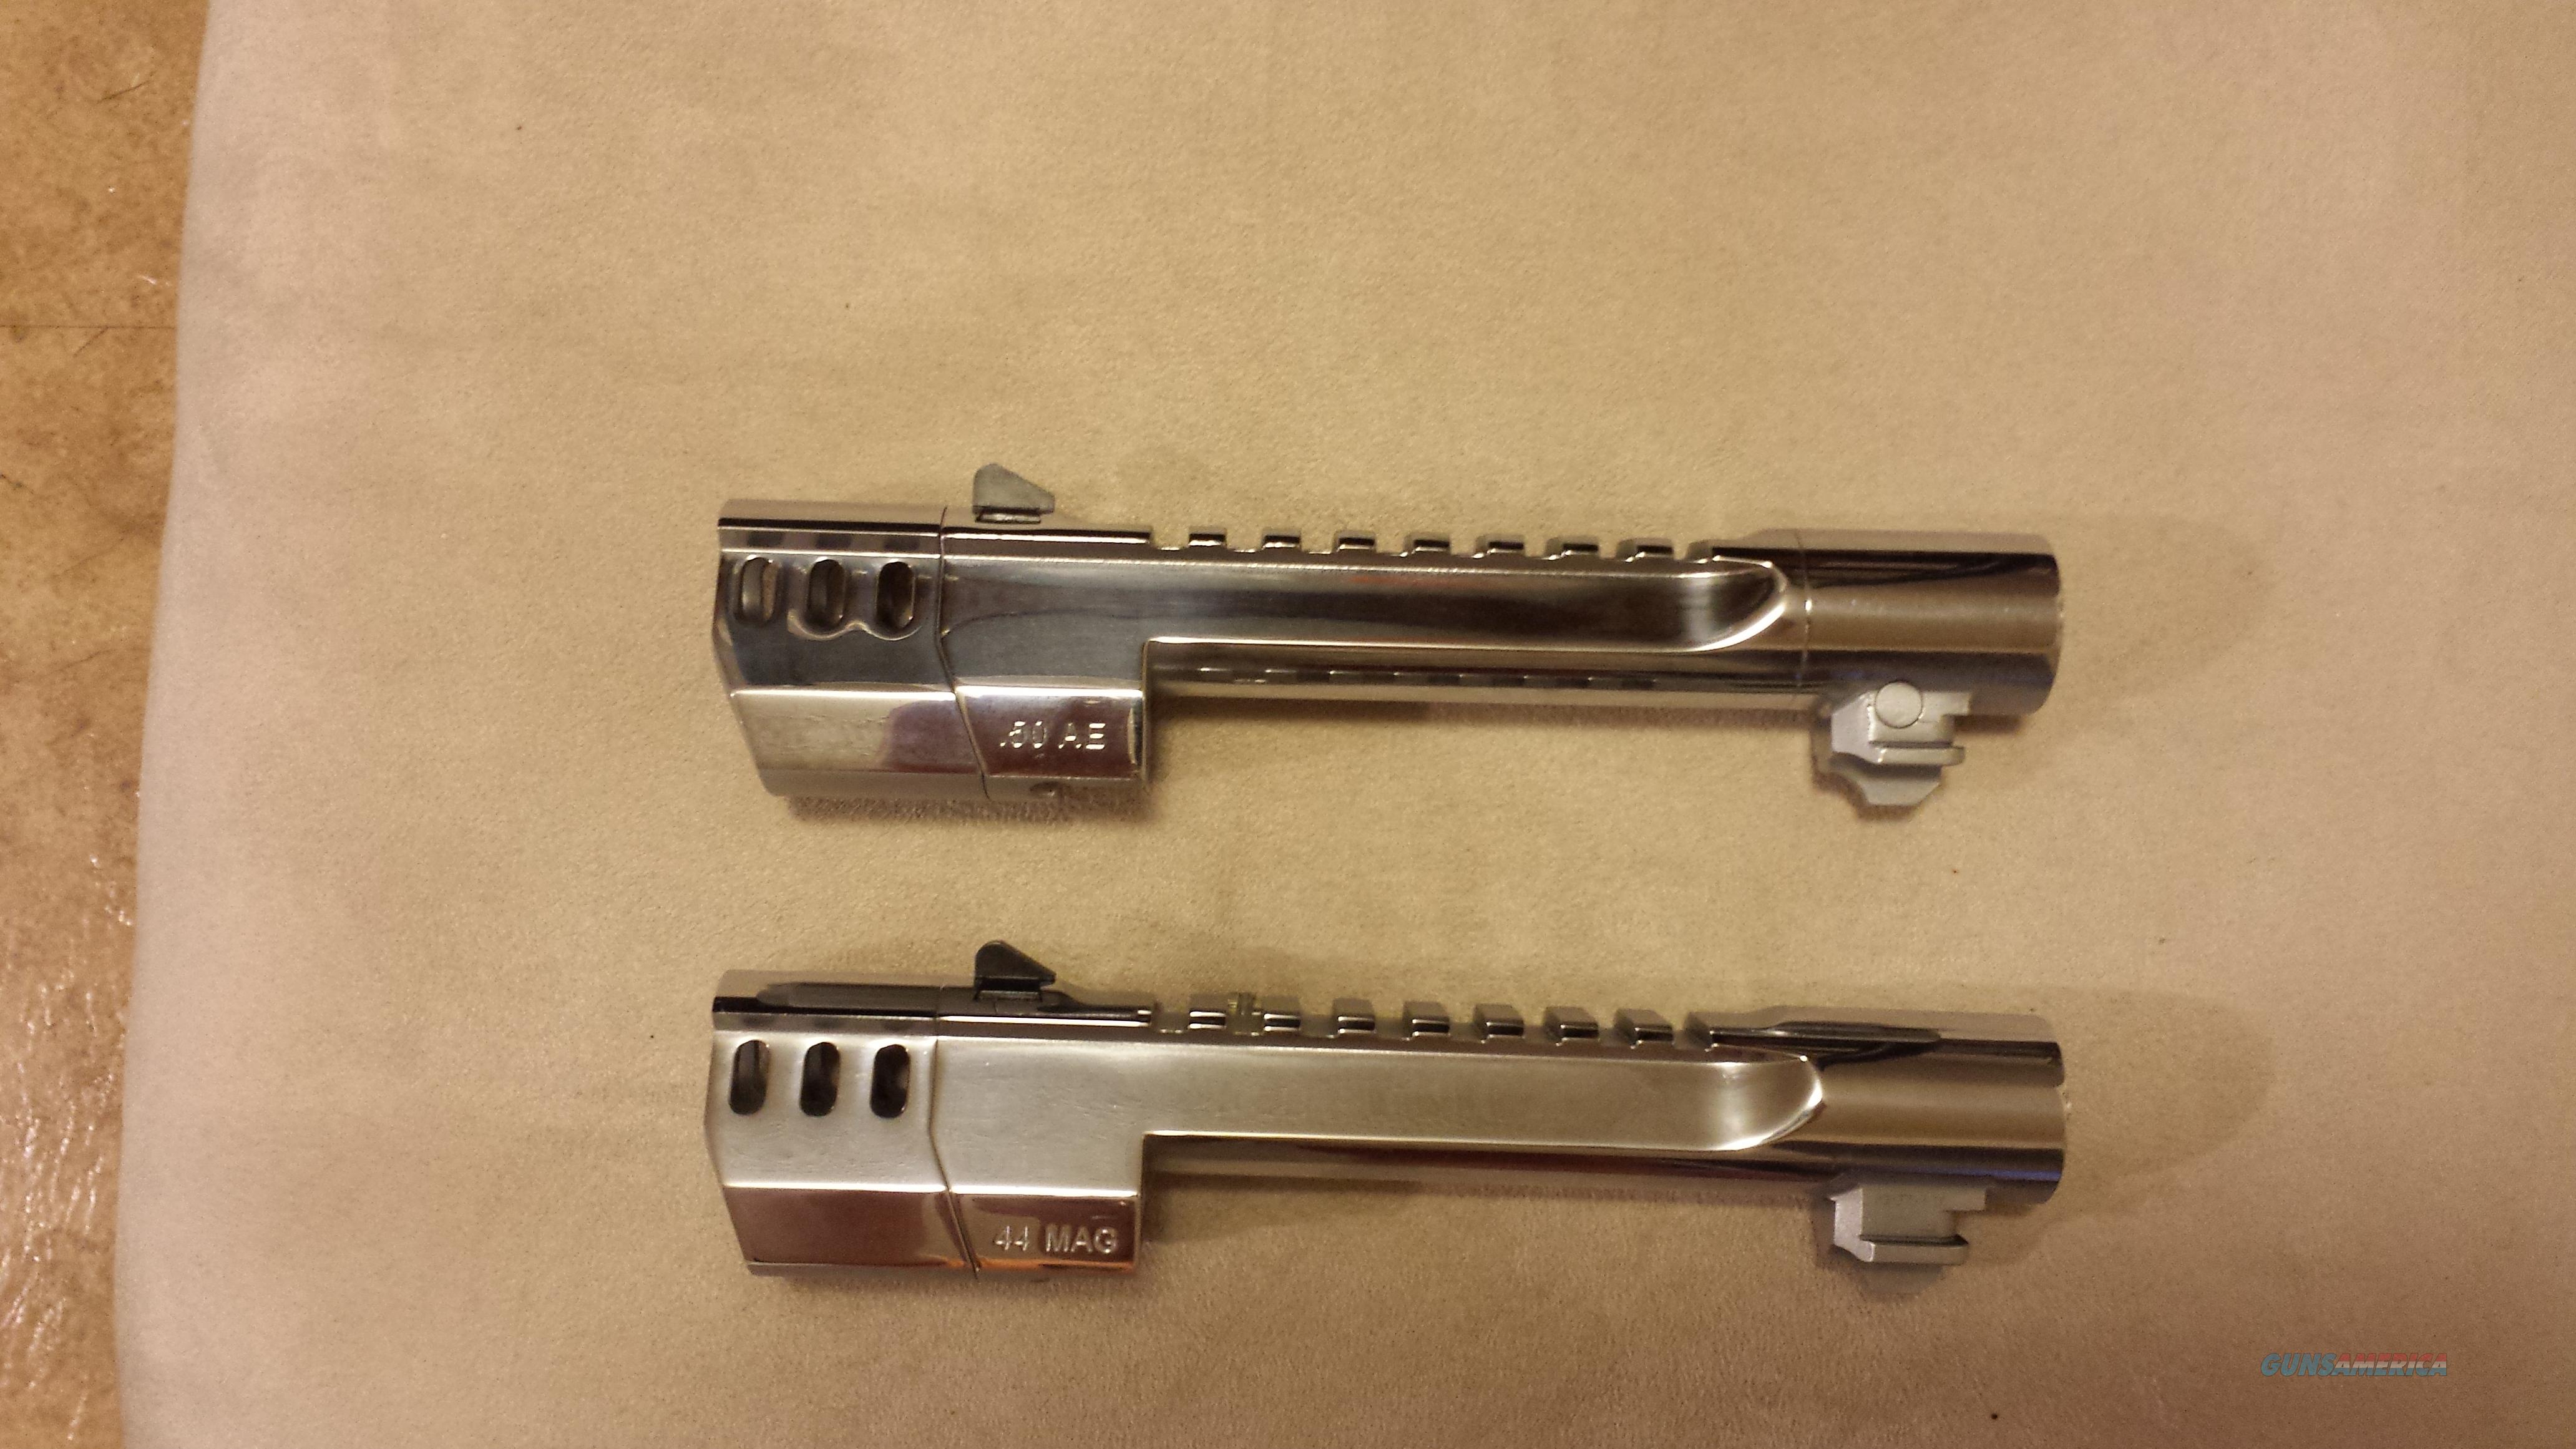 Desert Eagle Barrels With Muzzle Br For Sale At